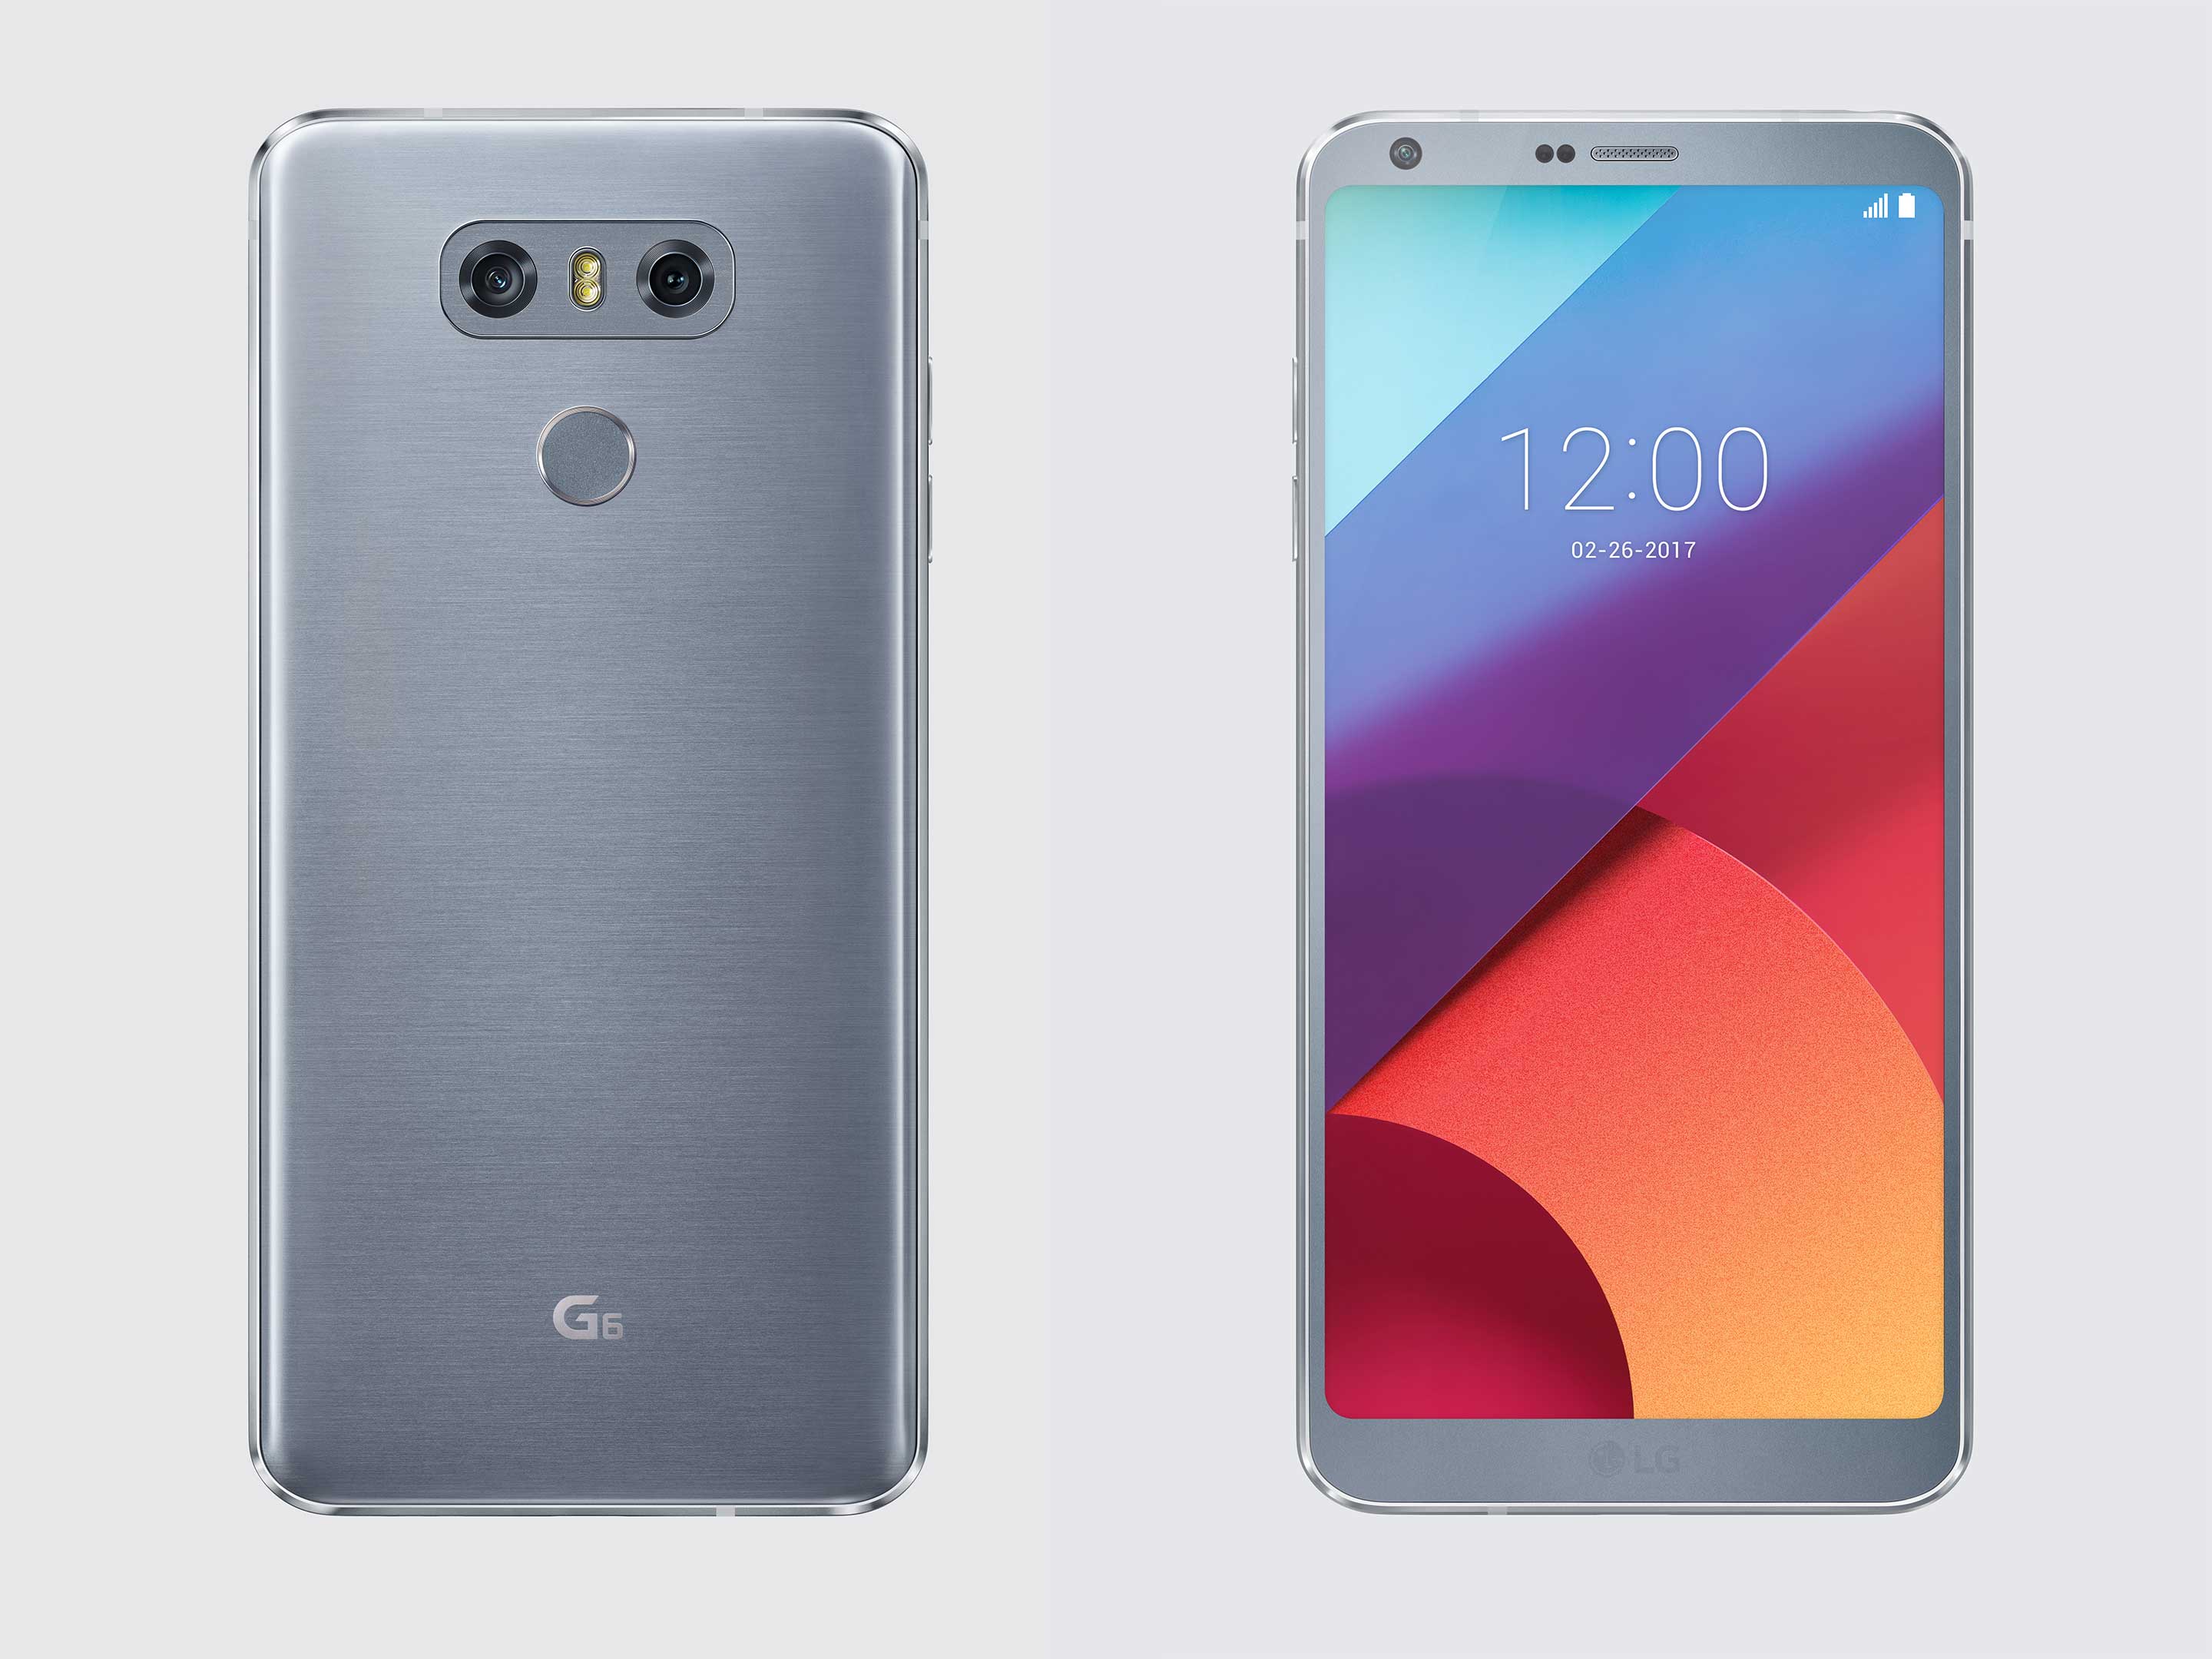 render of the LG G6